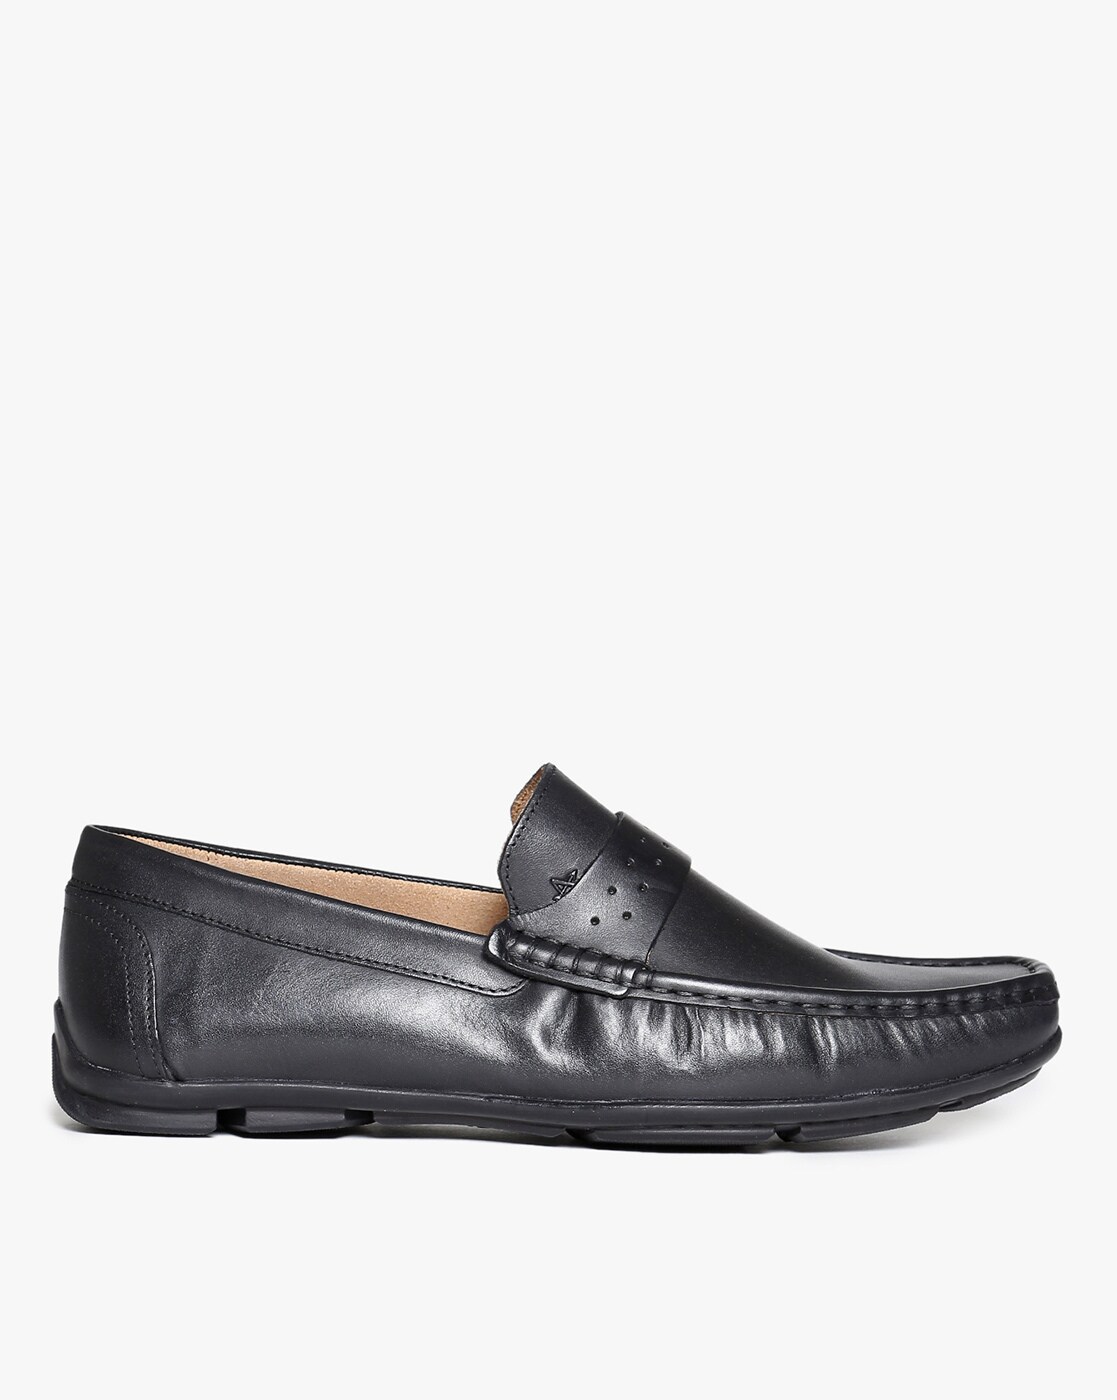 arrow shoes loafers